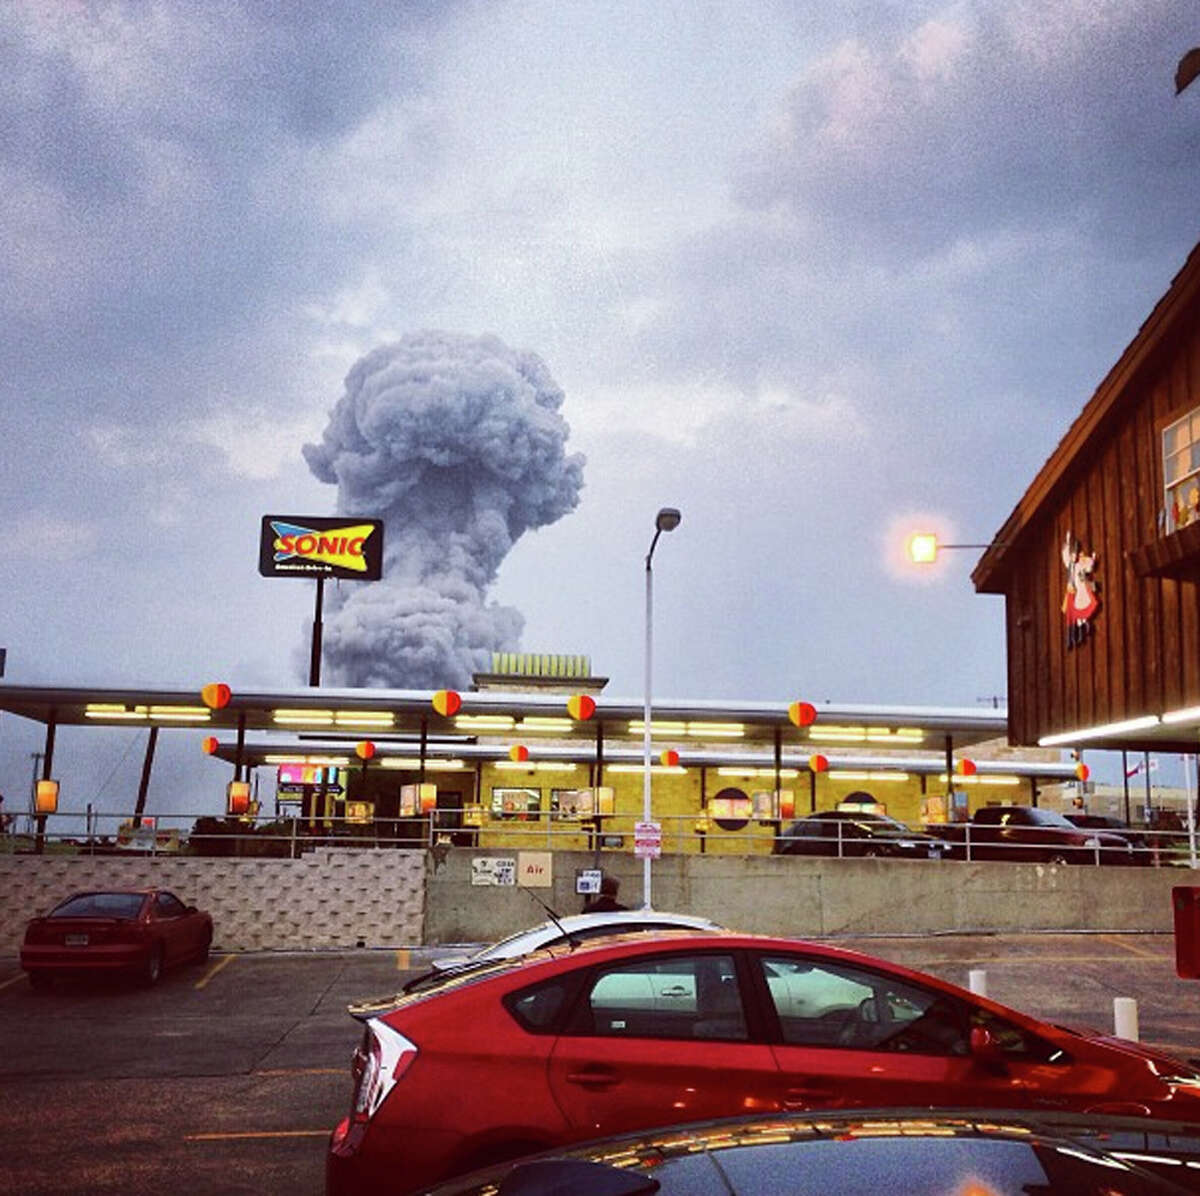 In this Instagram photo provided by Andy Bartee, a plume of smoke rises from a fertilizer plant fire in West, Texas on Wednesday, April 17, 2013. An explosion at a fertilizer plant near Waco Wednesday night injured dozens of people and sent flames shooting high into the night sky, leaving the factory a smoldering ruin and causing major damage to surrounding buildings. (AP Photo/Andy Bartee) MANDATORY CREDIT: ANDY BARTEE